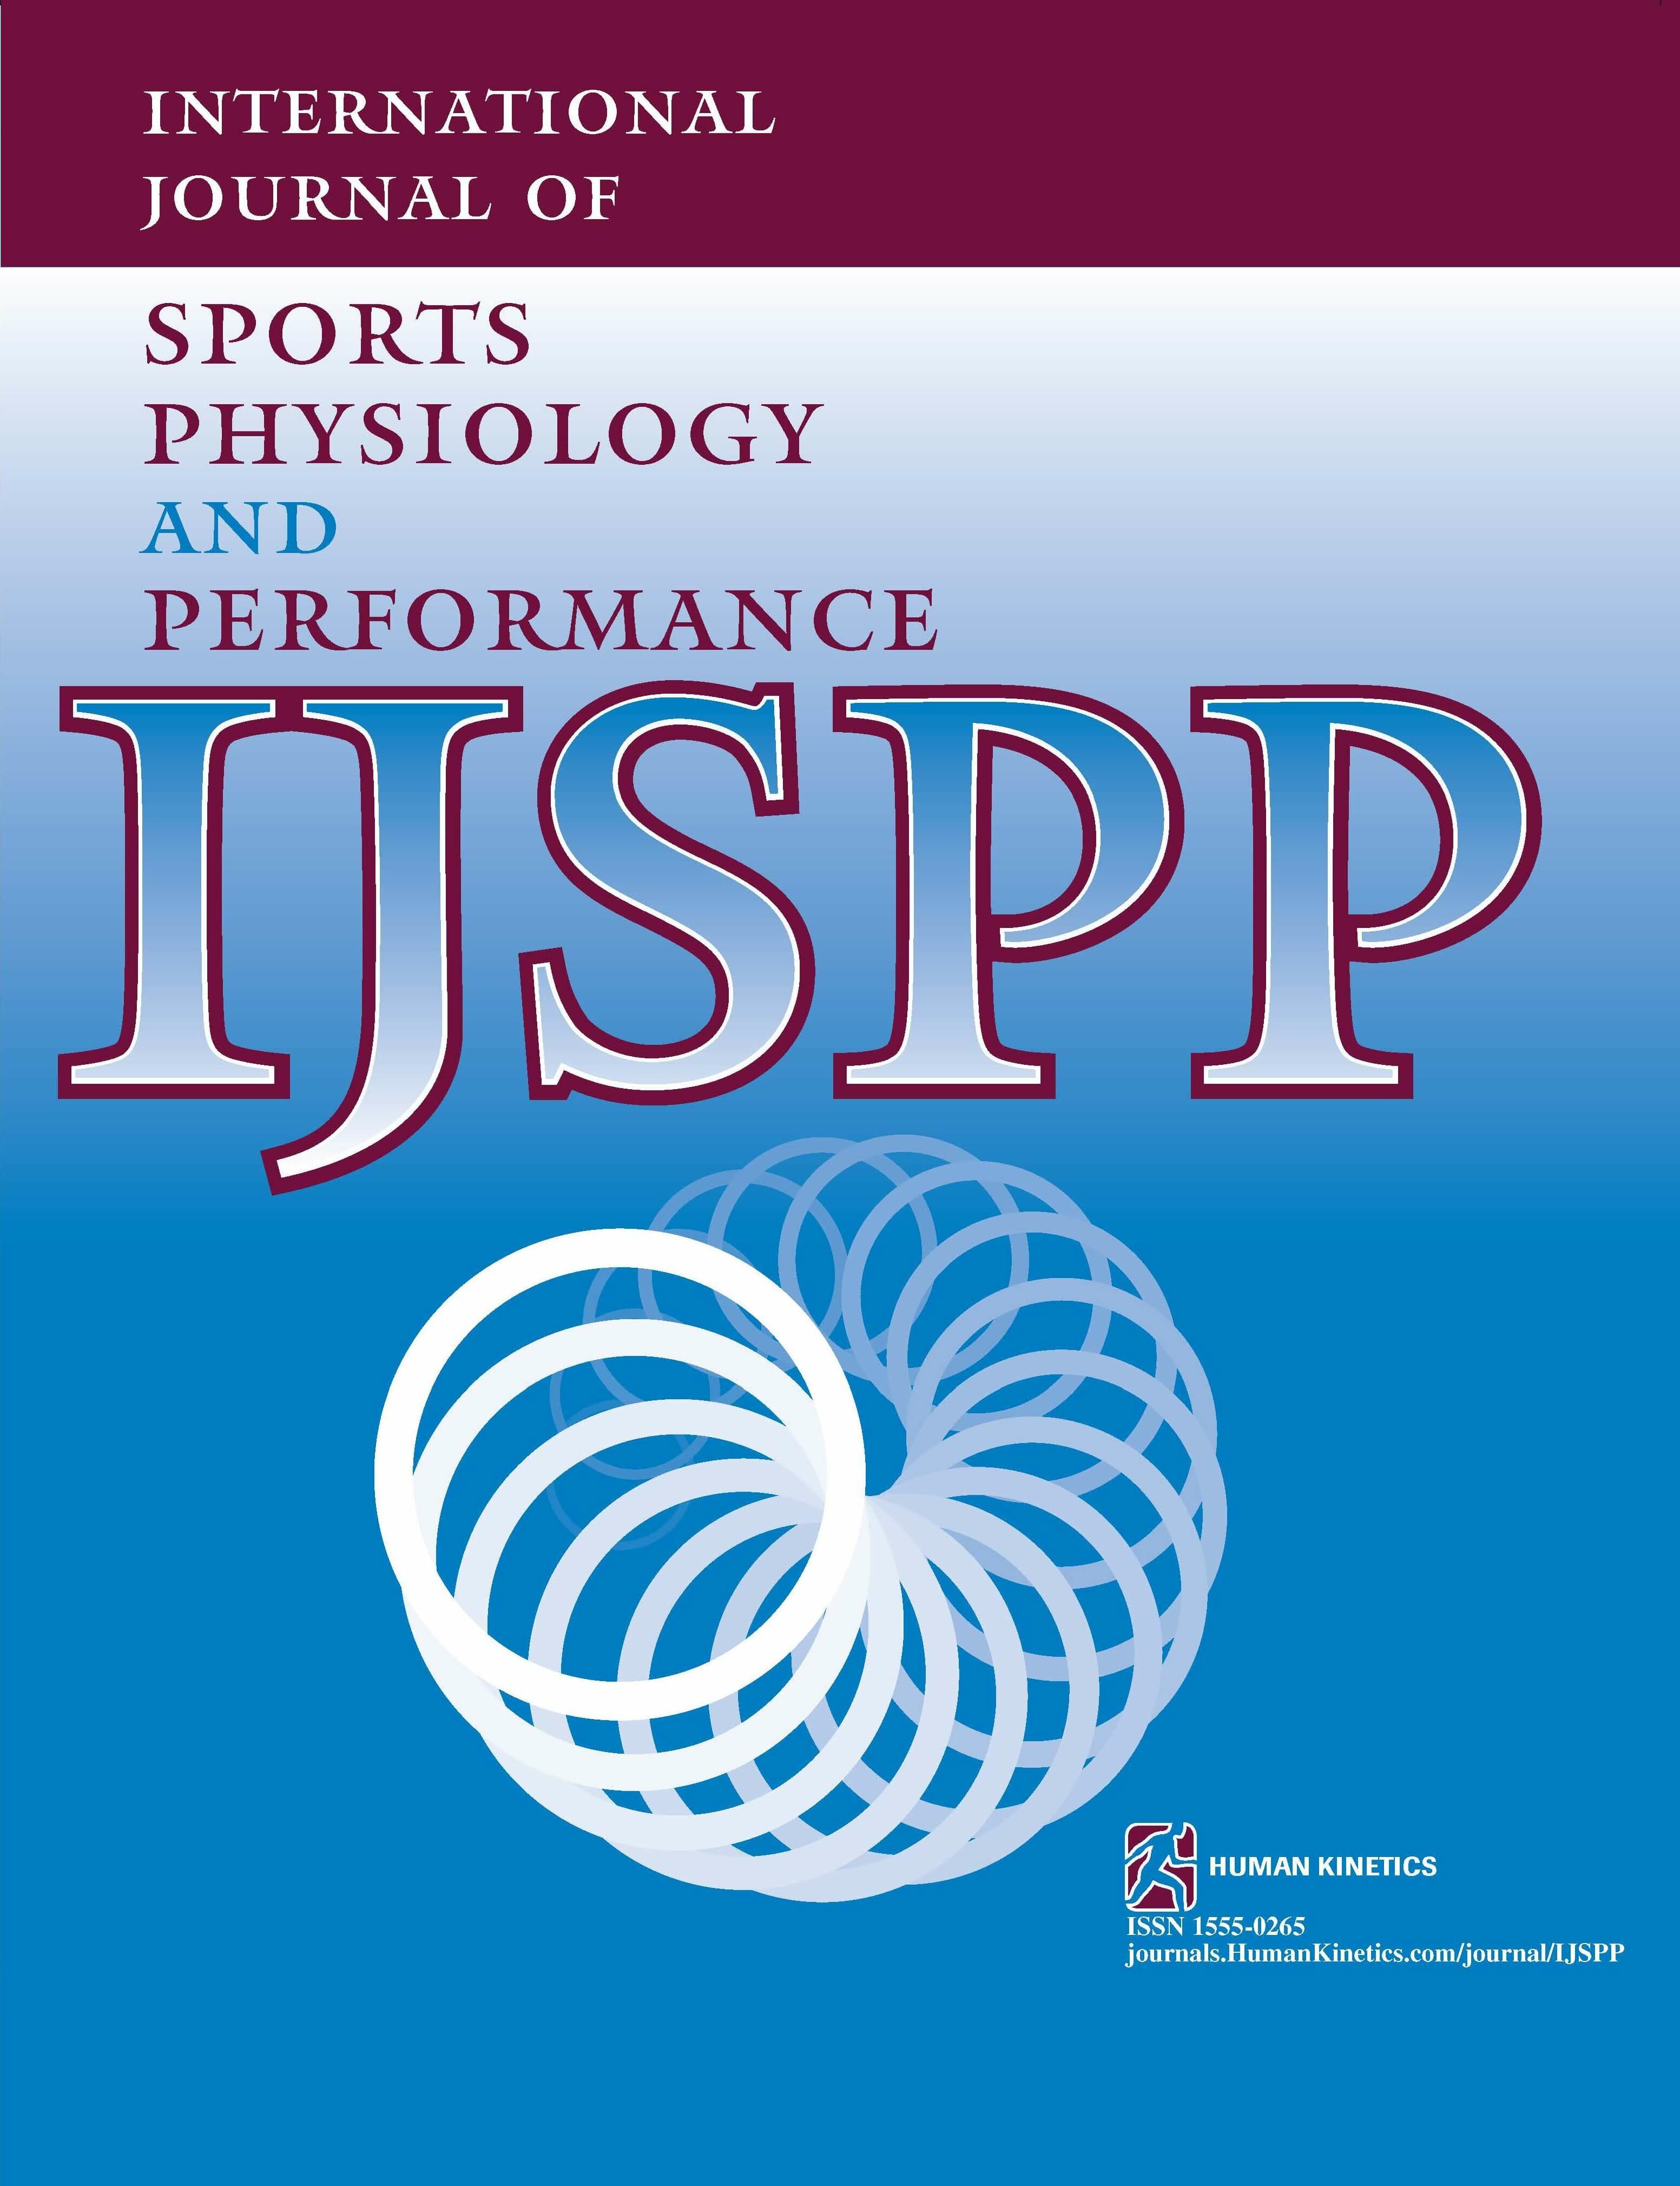 From Theory to Practice: A Worldwide Cross-Sectional Survey About Flywheel Training in Basketball